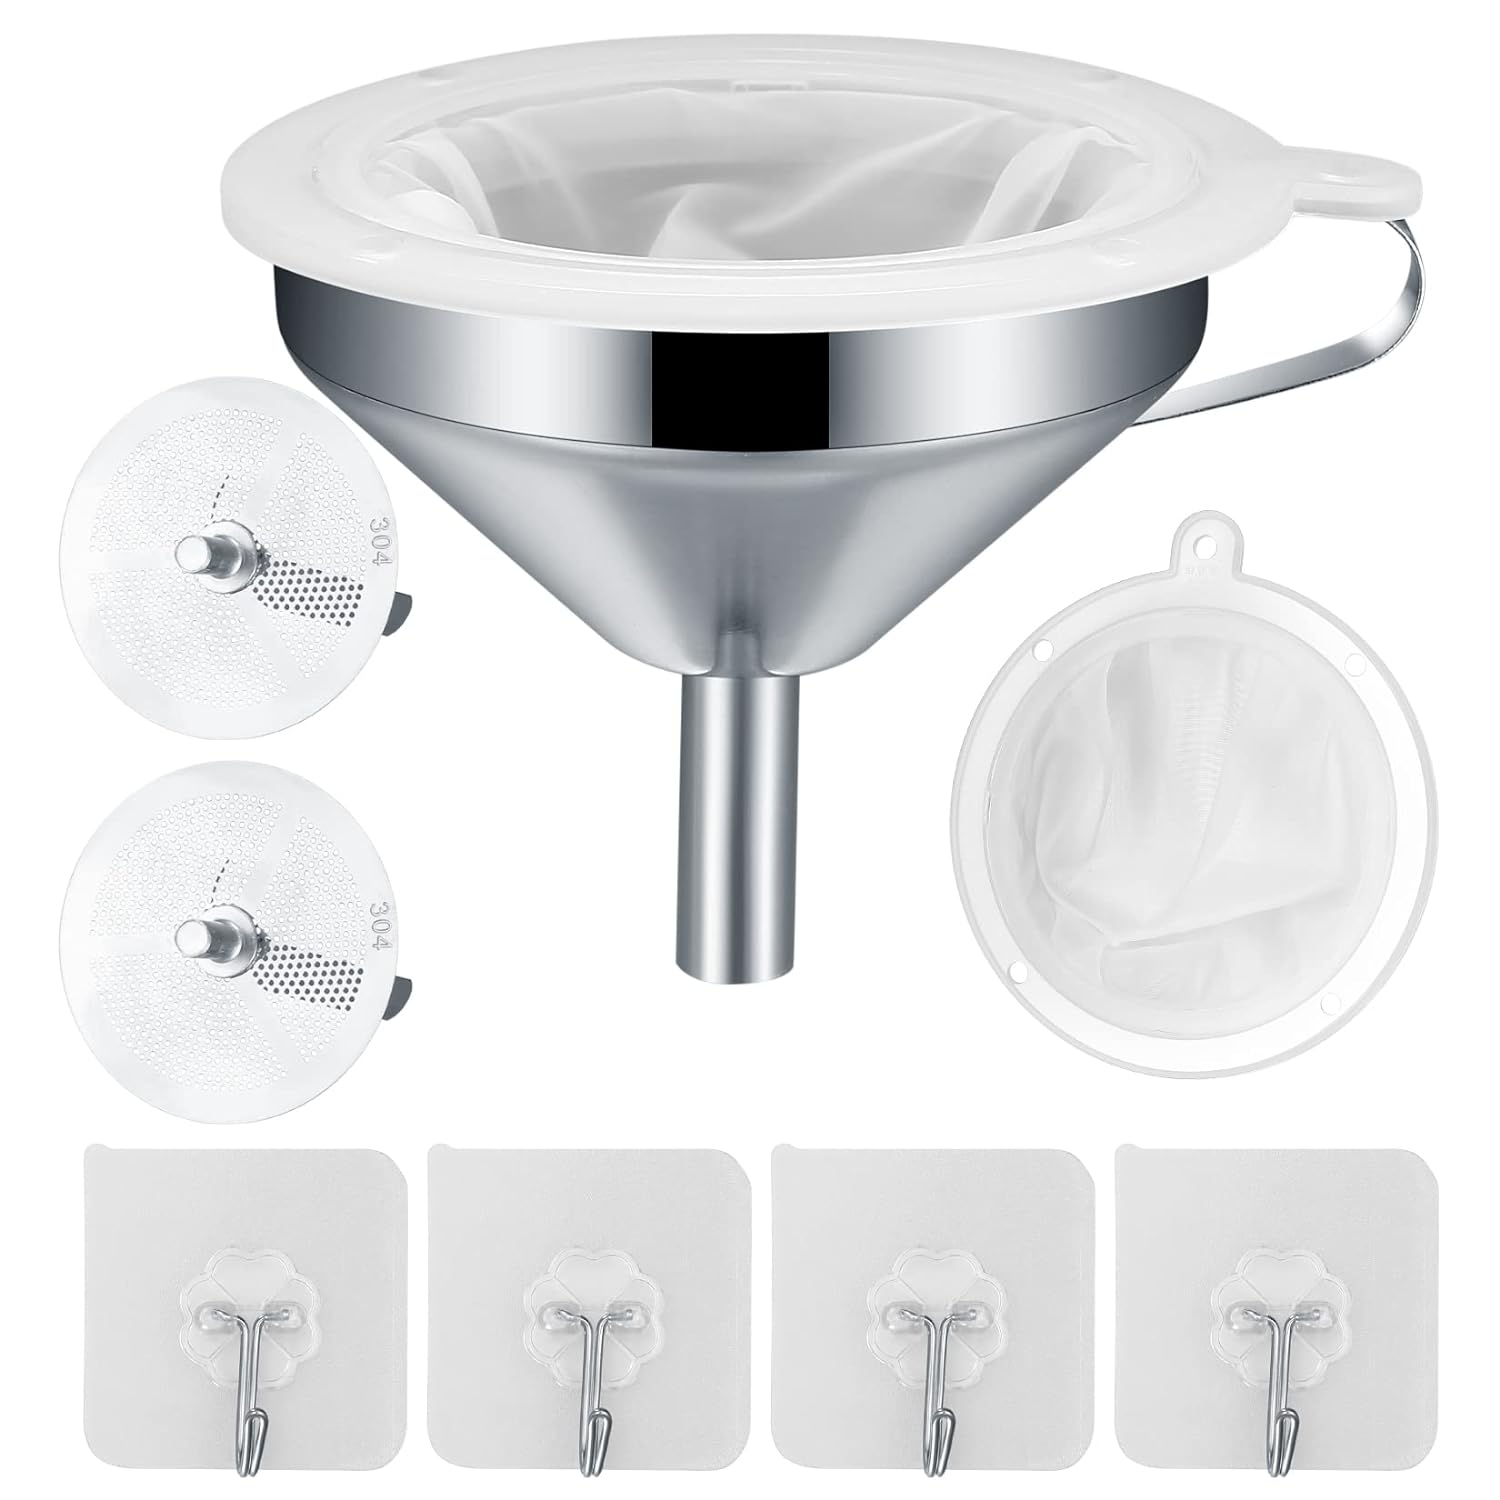 Limited-Time Promo: Stainless Steel Kitchen Funnels on Sale!